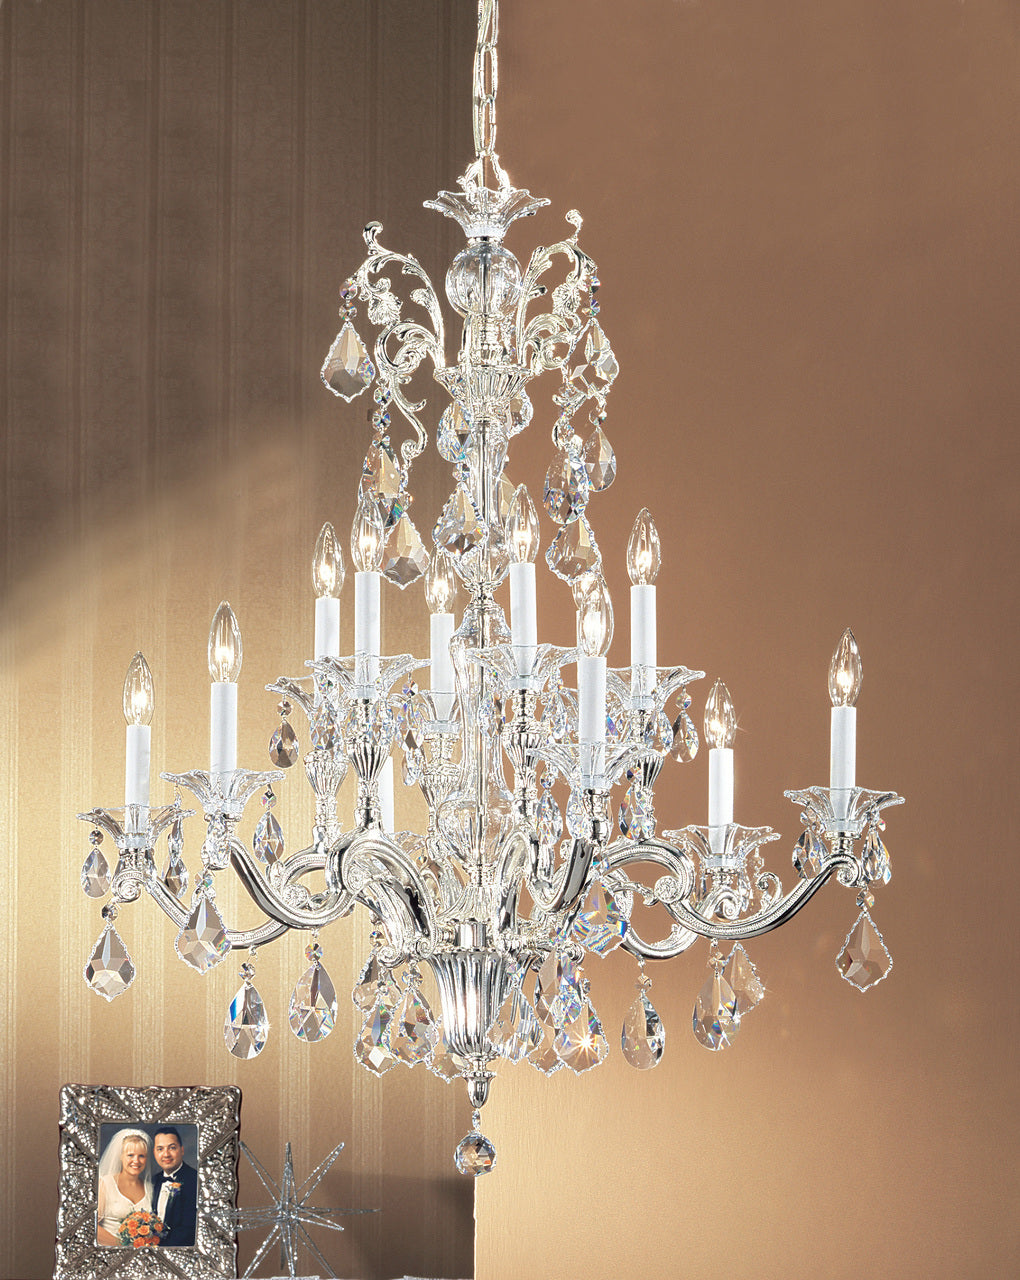 Classic Lighting 57112 SP CSA Via Firenze Crystal Chandelier in Silver (Imported from Spain)